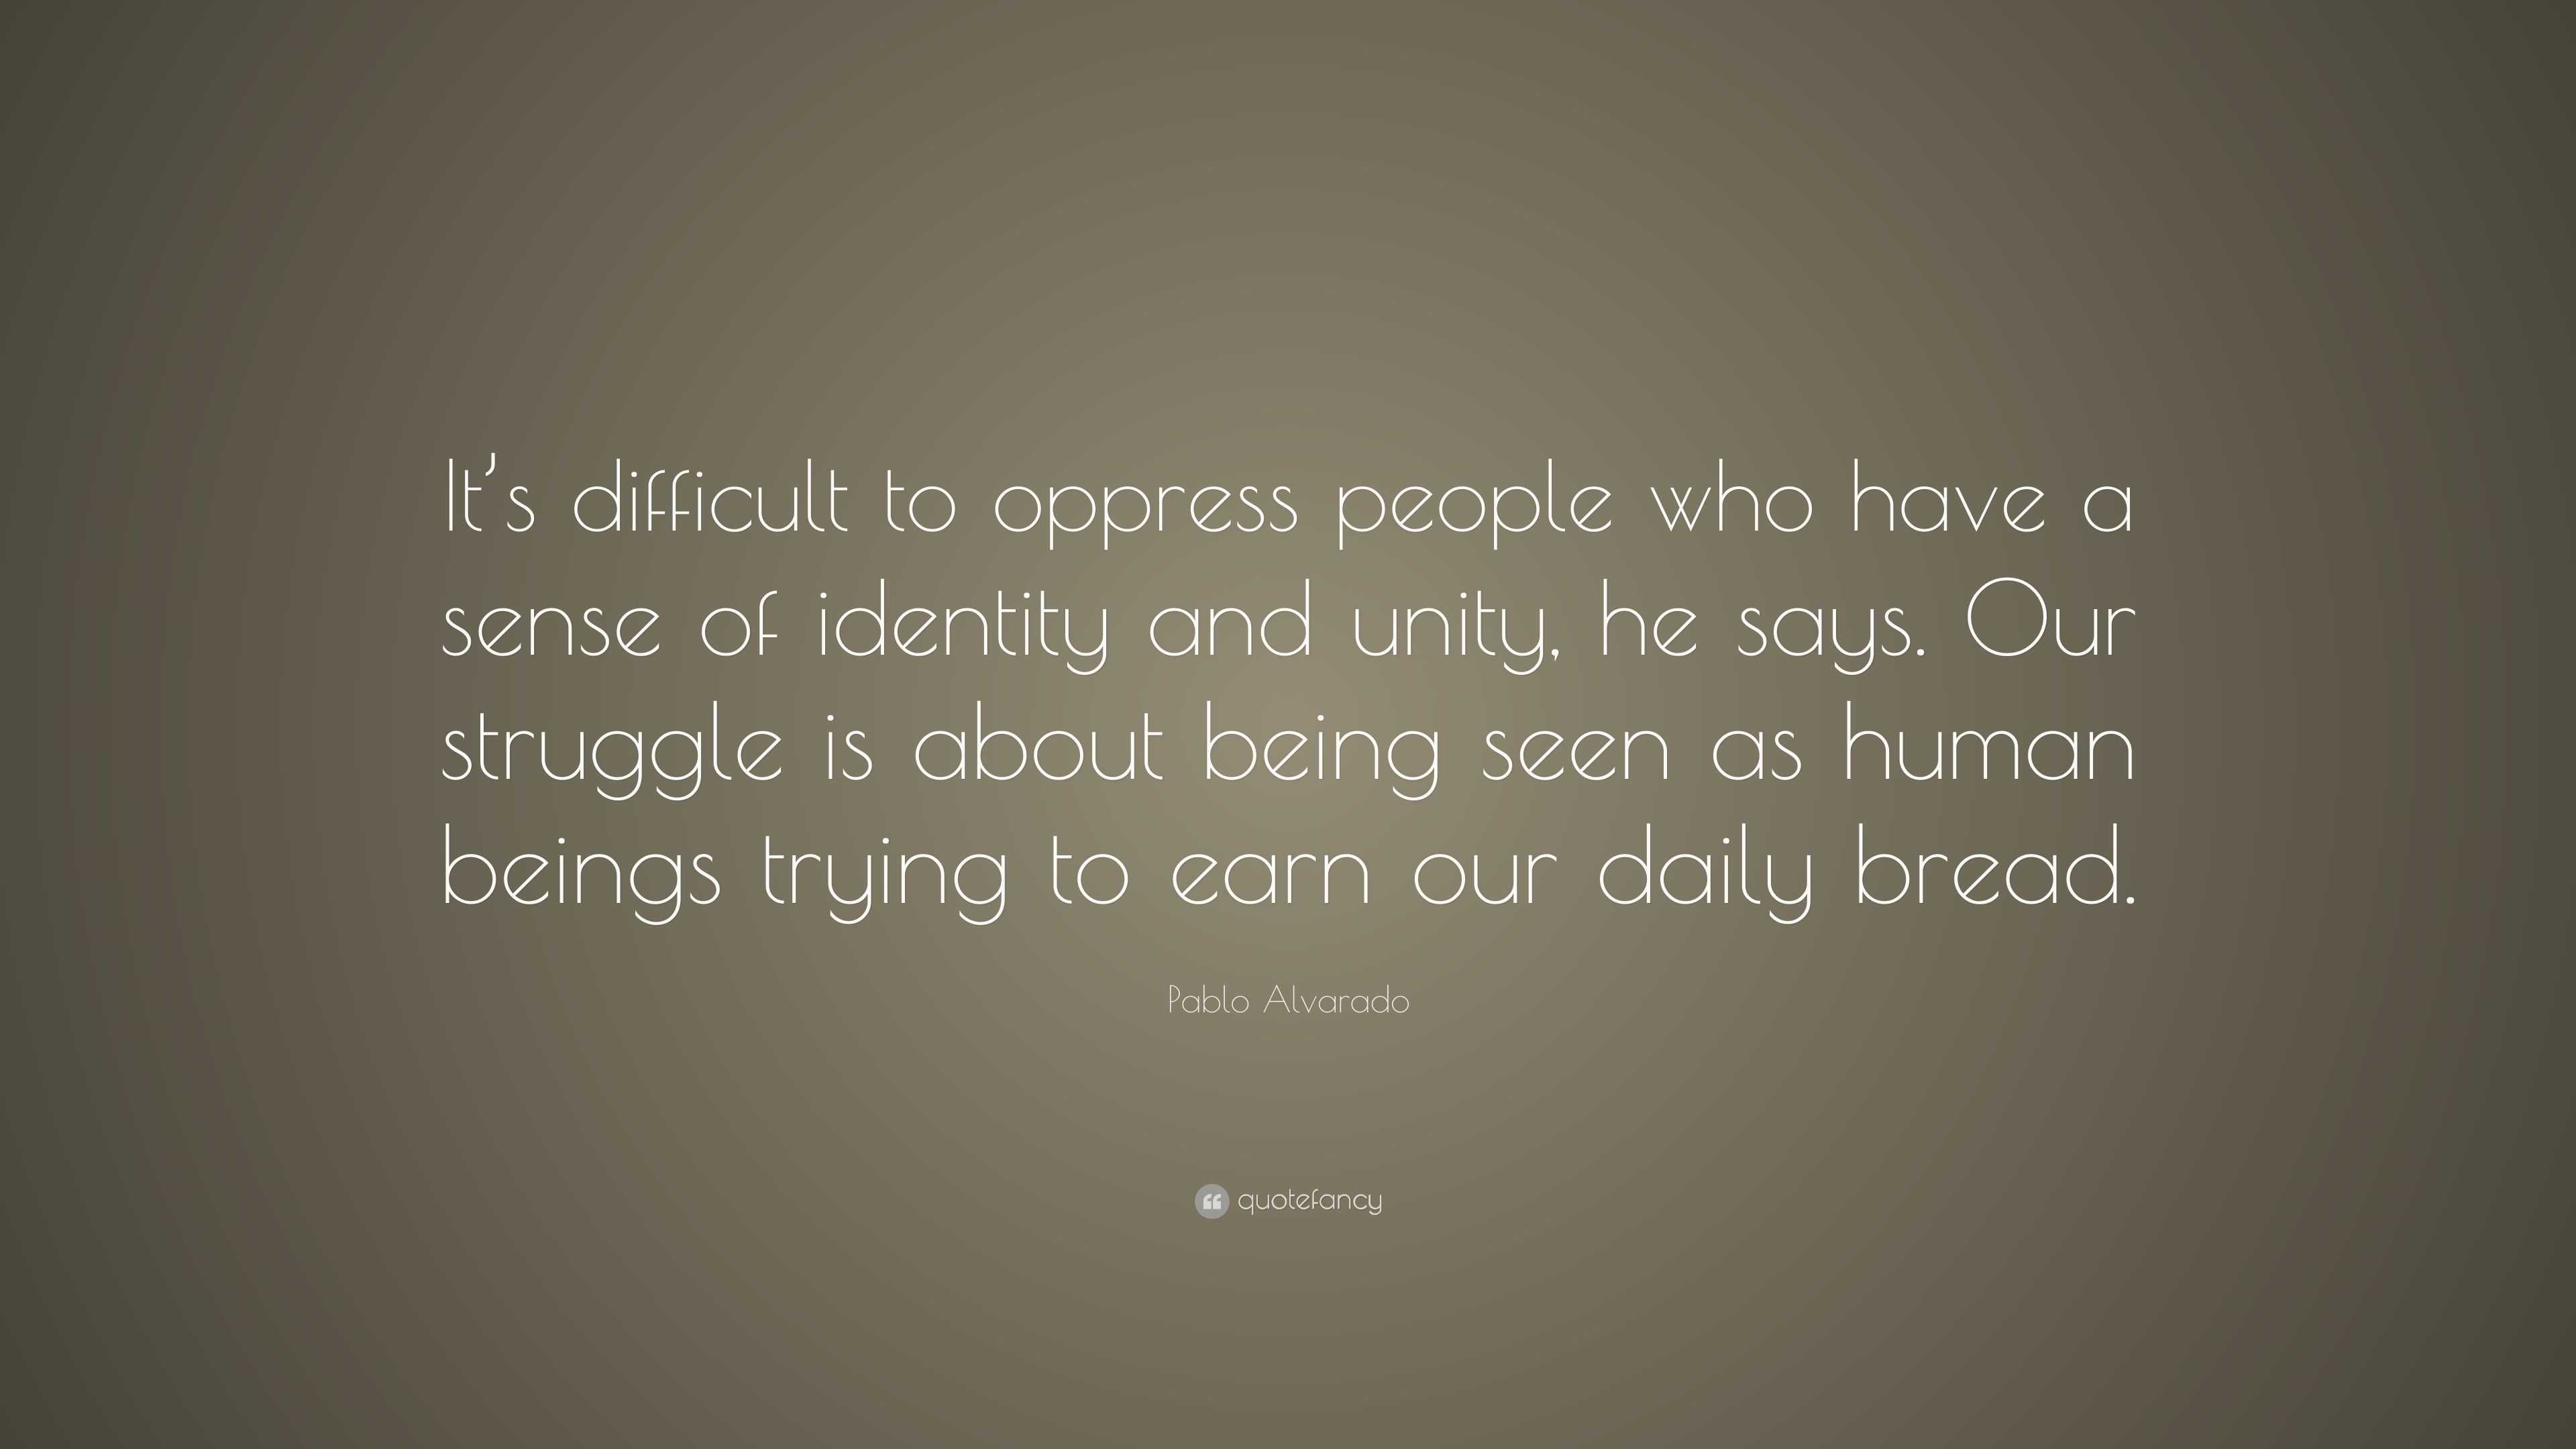 Pablo Alvarado Quote: “It’s difficult to oppress people who have a ...